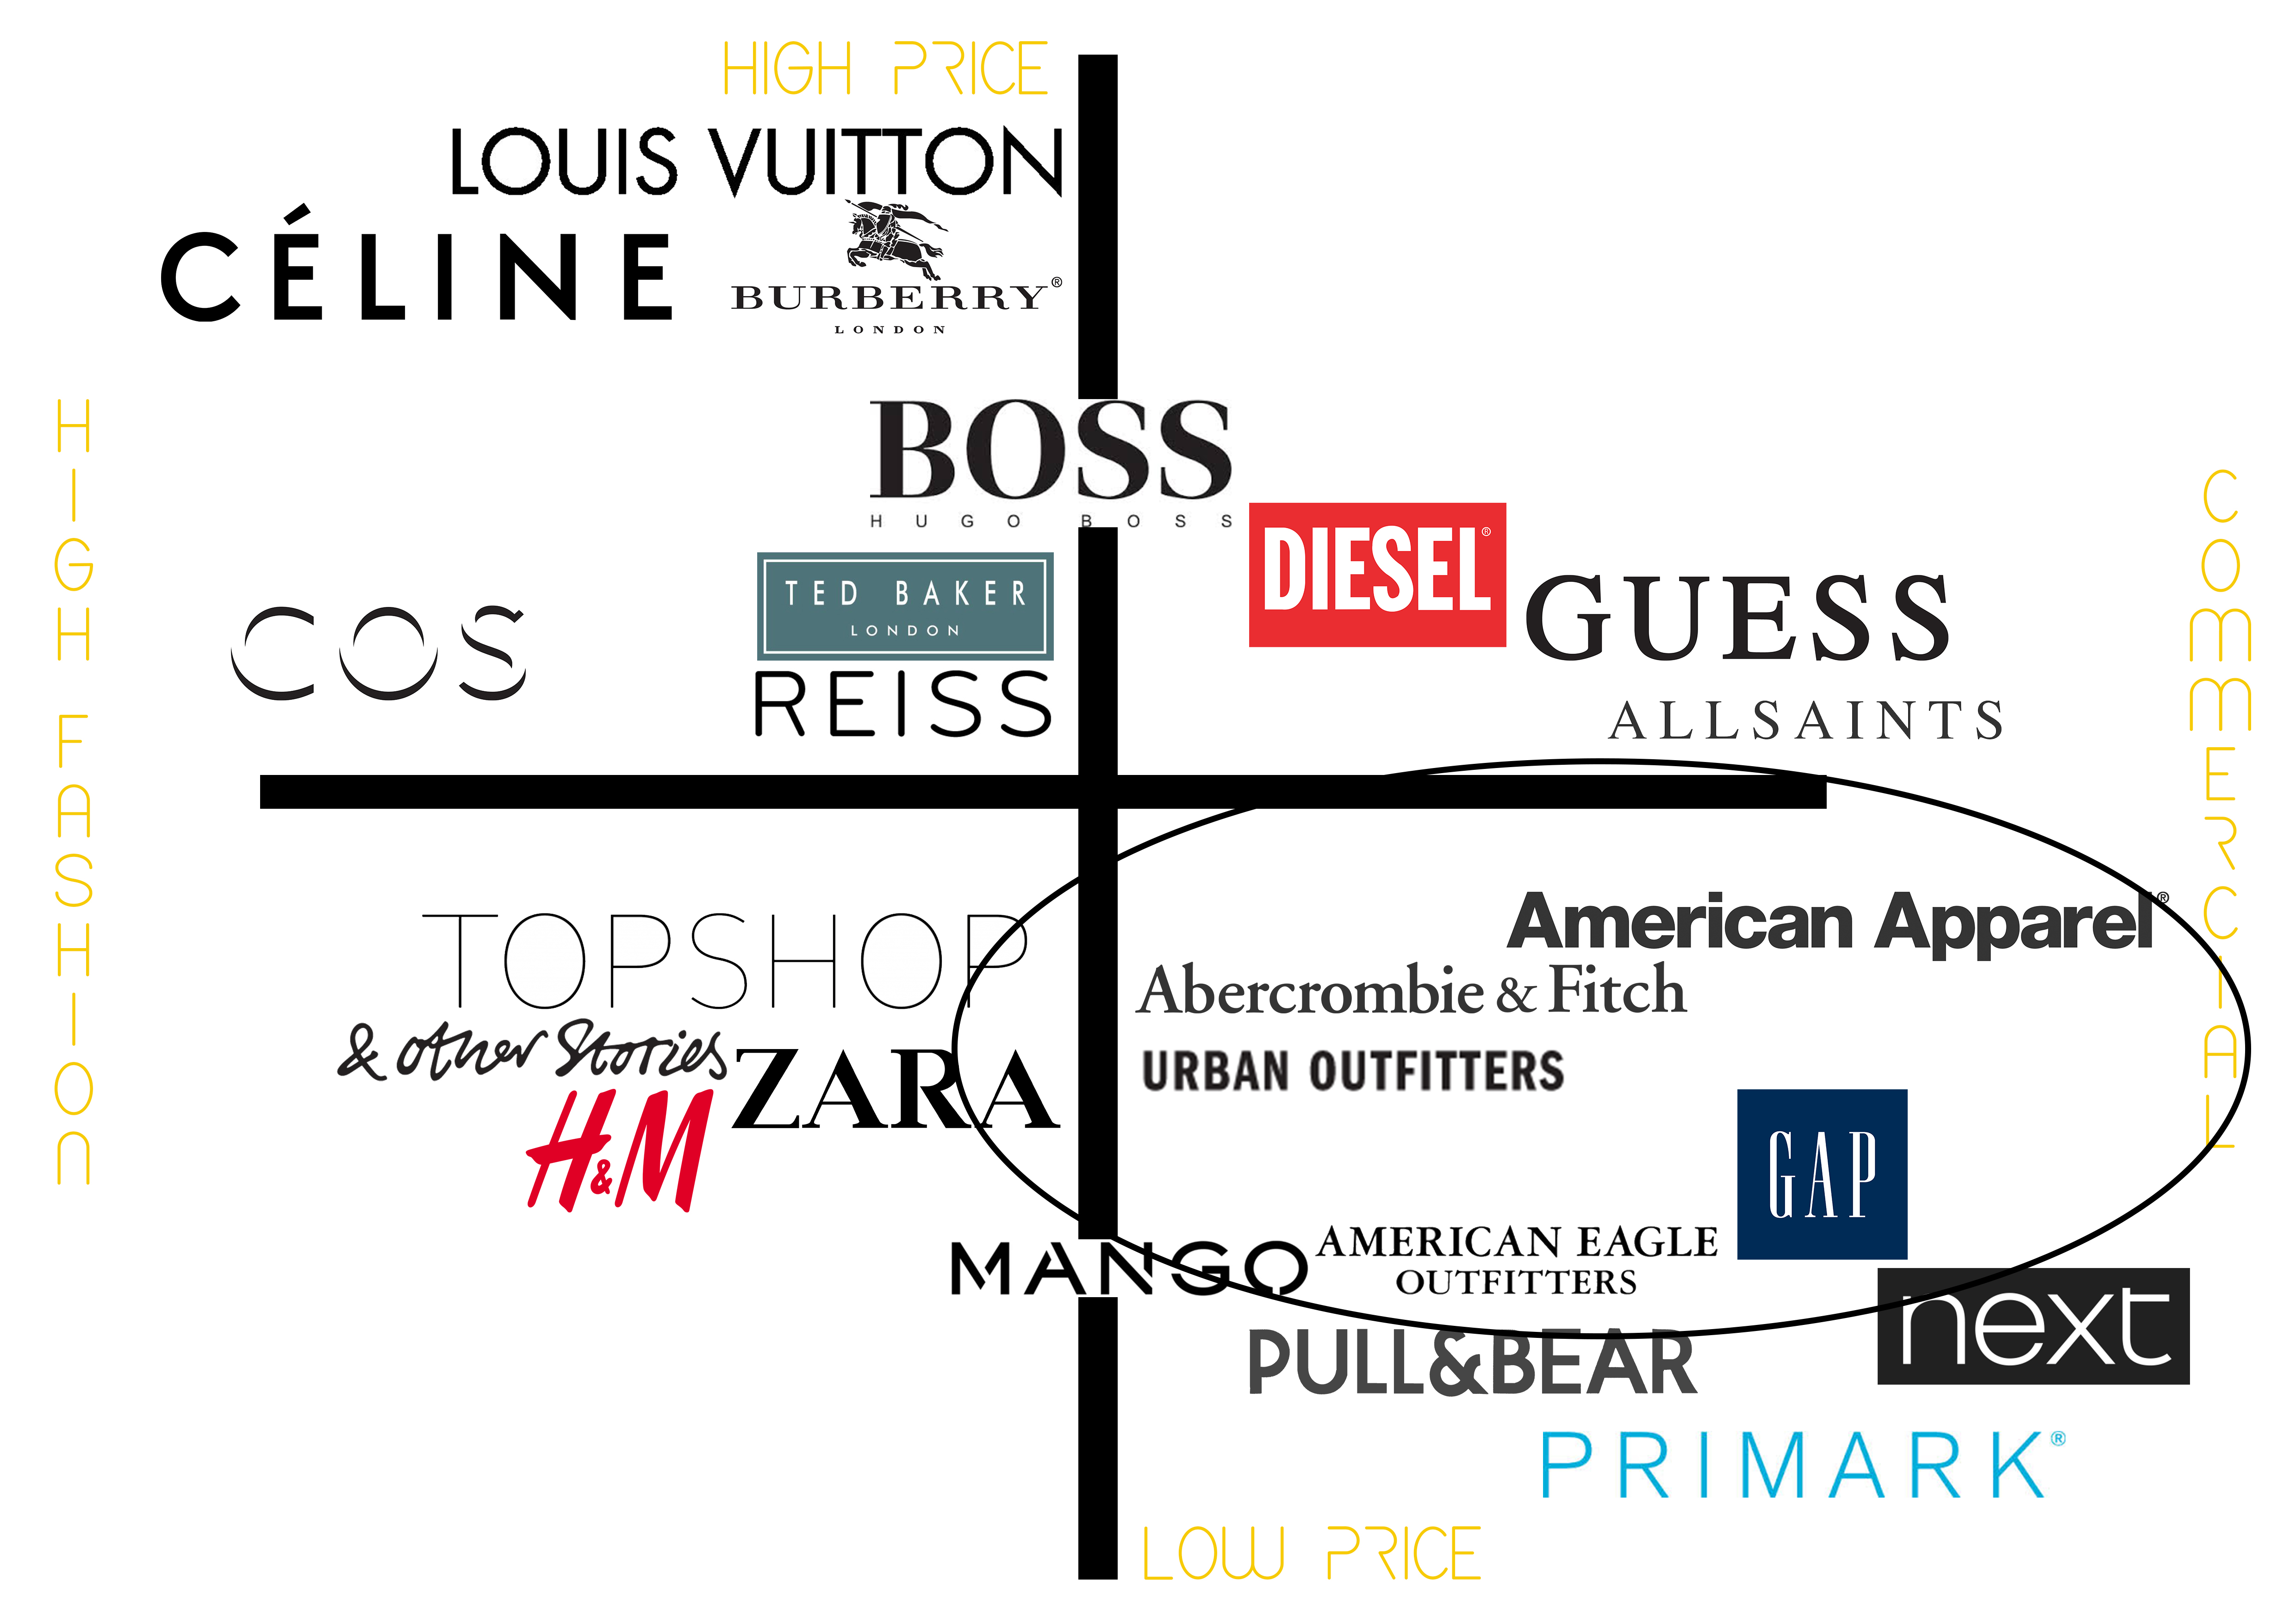 abercrombie & fitch competitors